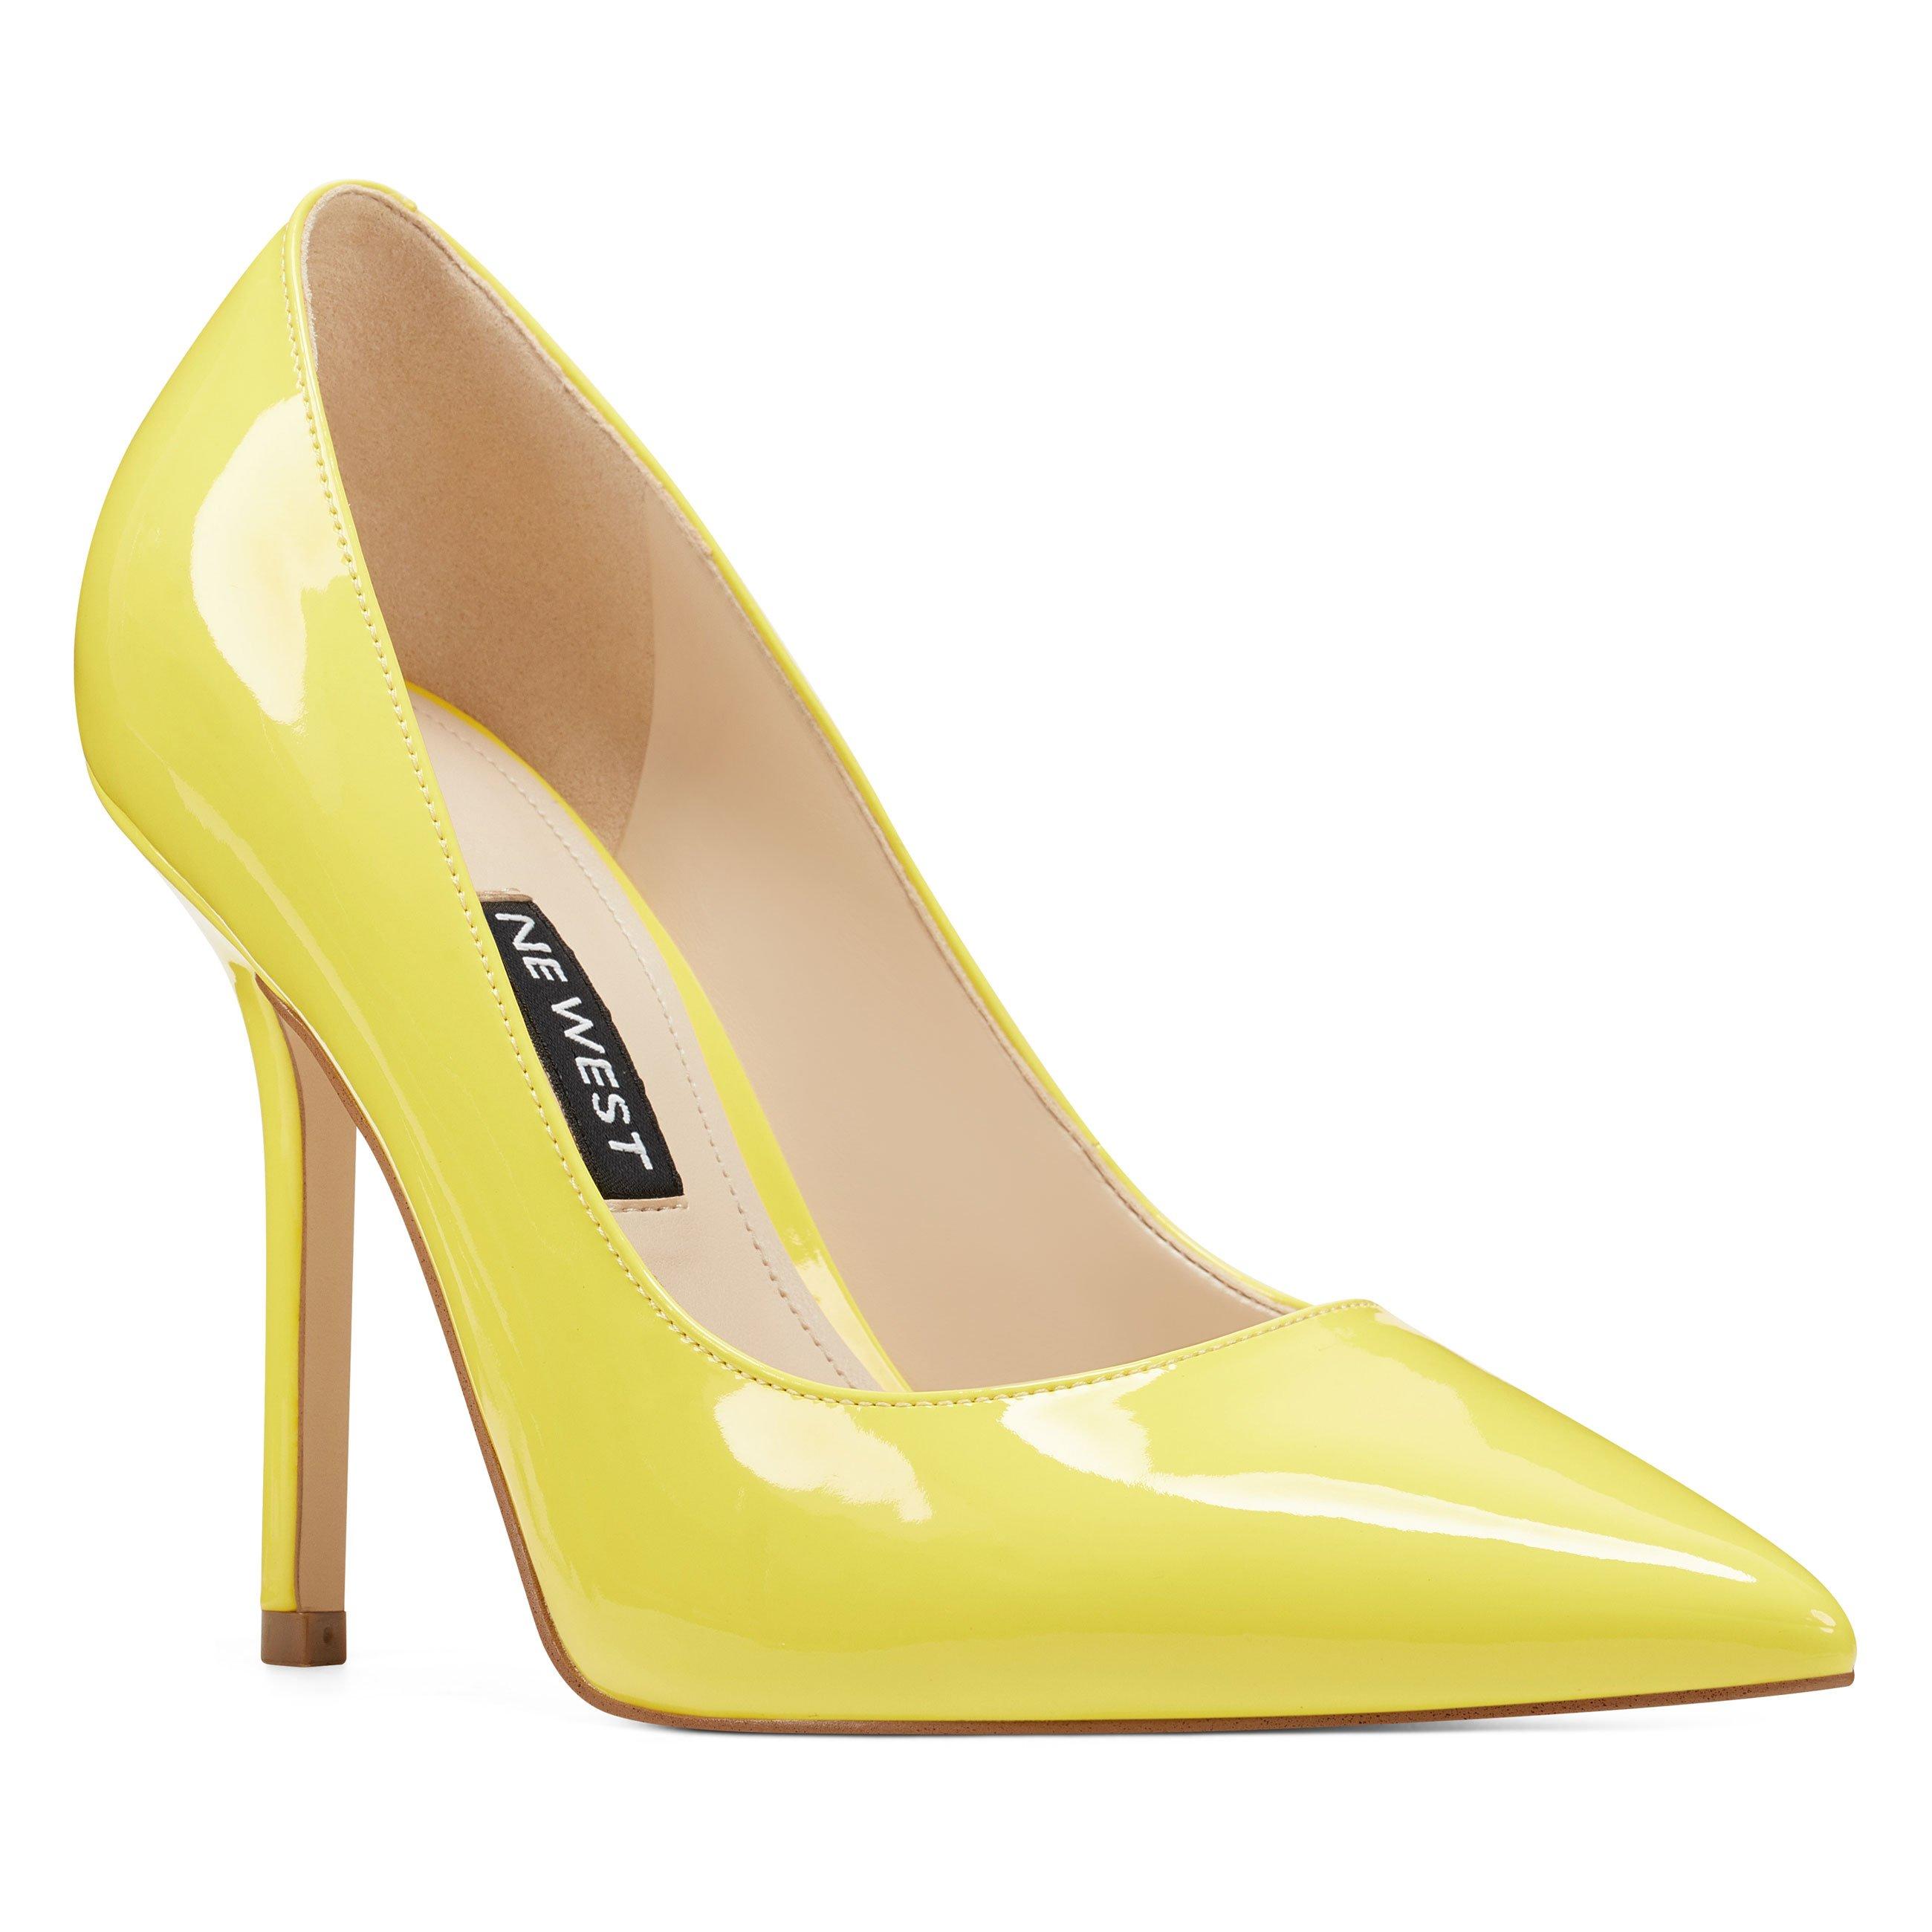 Nine West Bliss Pointy Toe Pumps in Yellow Patent (Yellow) - Lyst